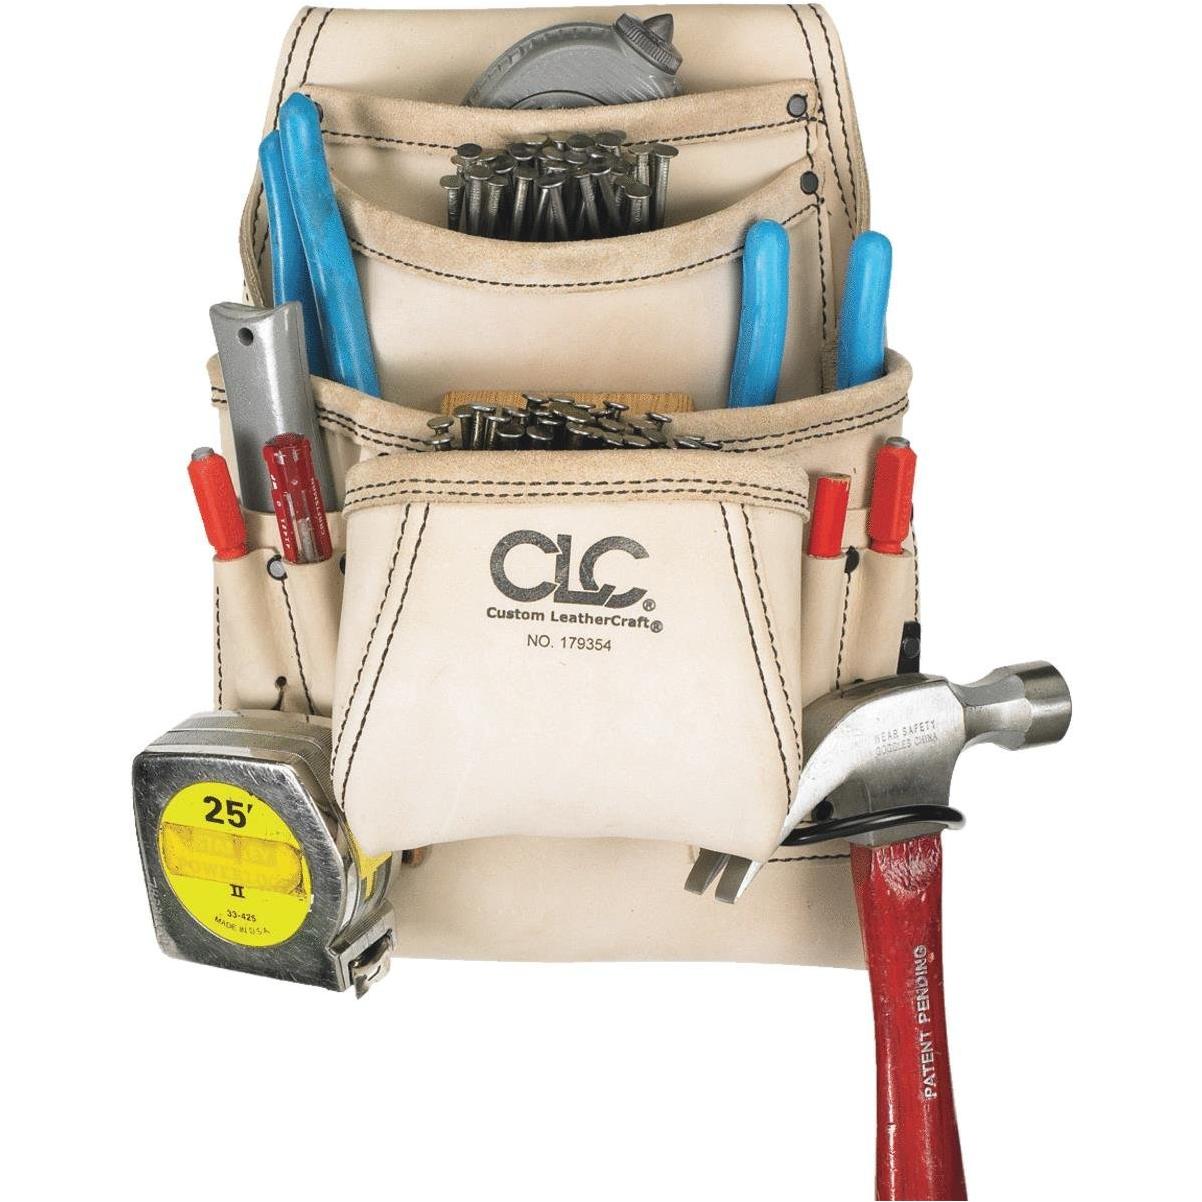 Clc 10 Pocket Leather Carpenter S Nail, Clc Leather Tool Bags